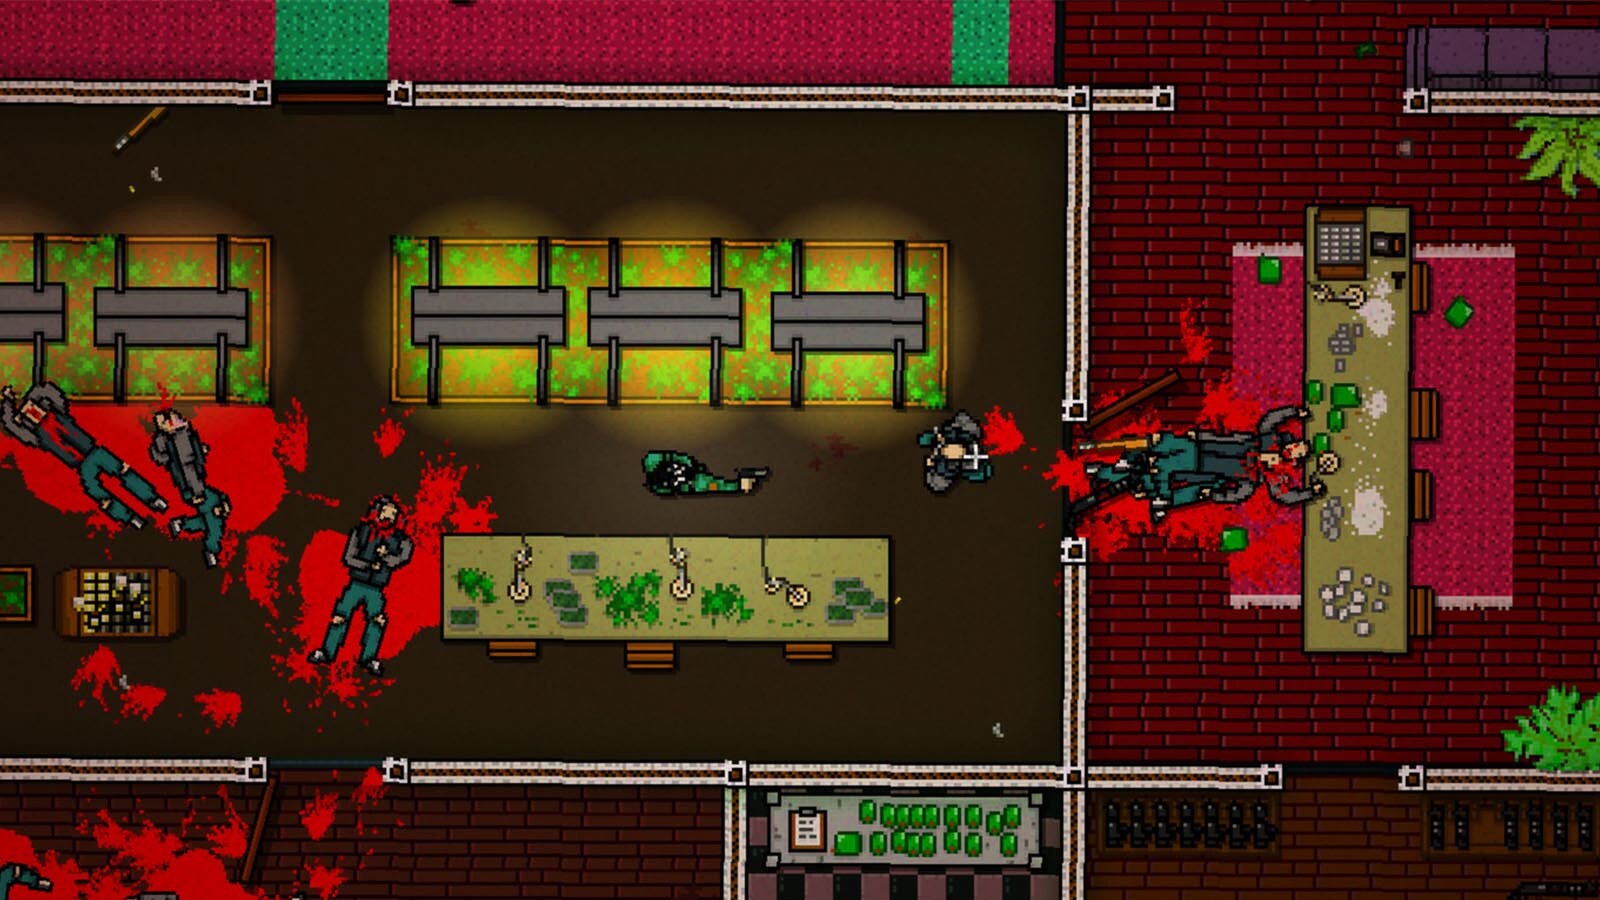 Hotline Miami 2: Number Steam Key PC, Mac and Linux - Buy